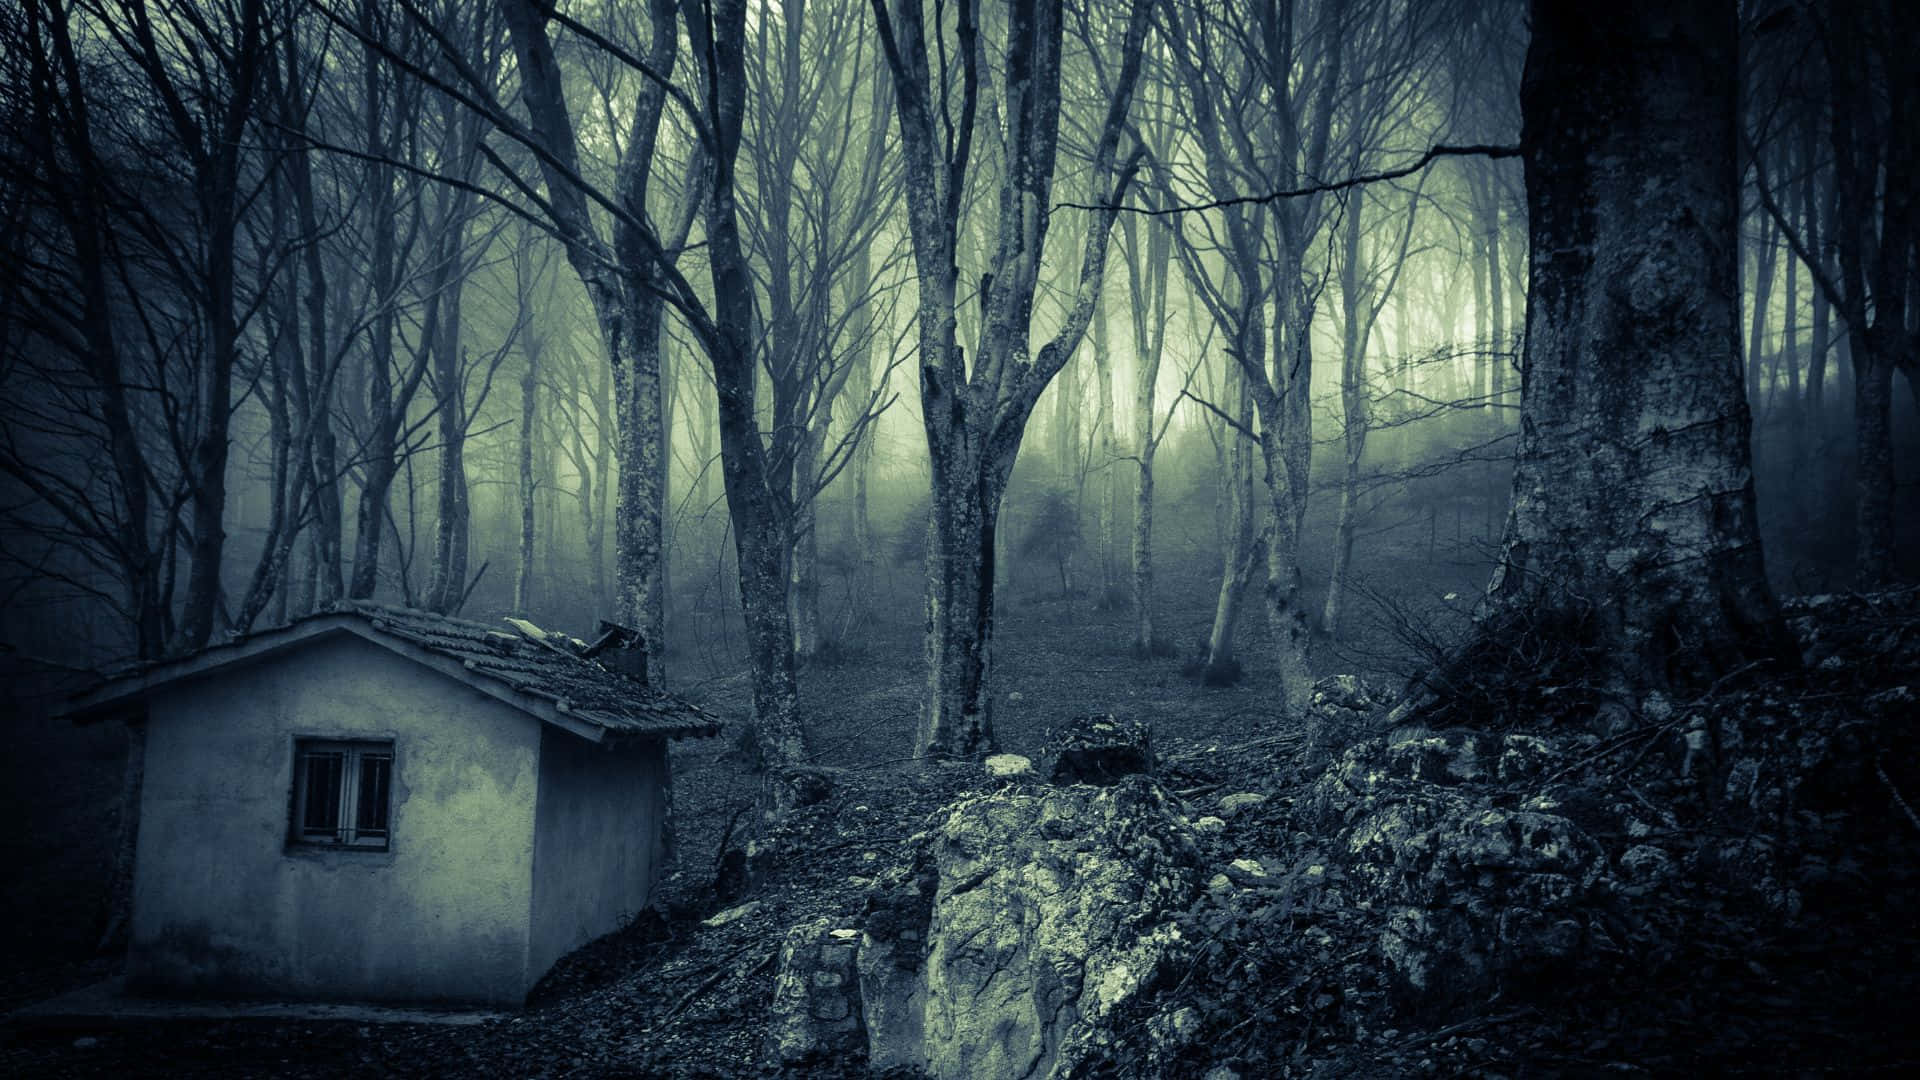 Explore the Haunting Forests Wallpaper